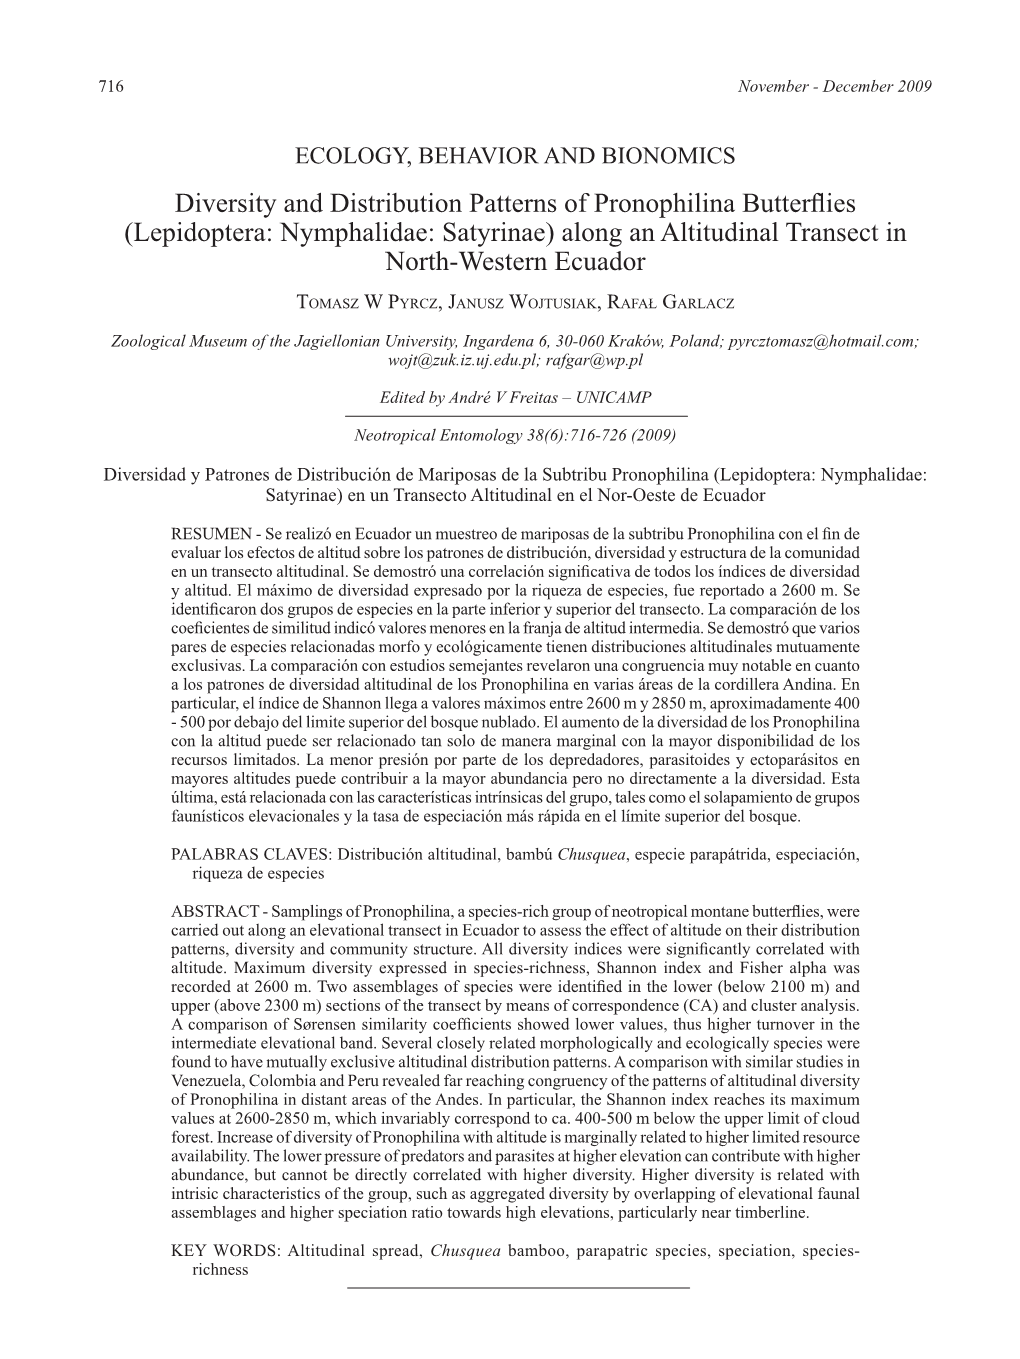 Diversity and Distribution Patterns of Pronophilina Butterflies